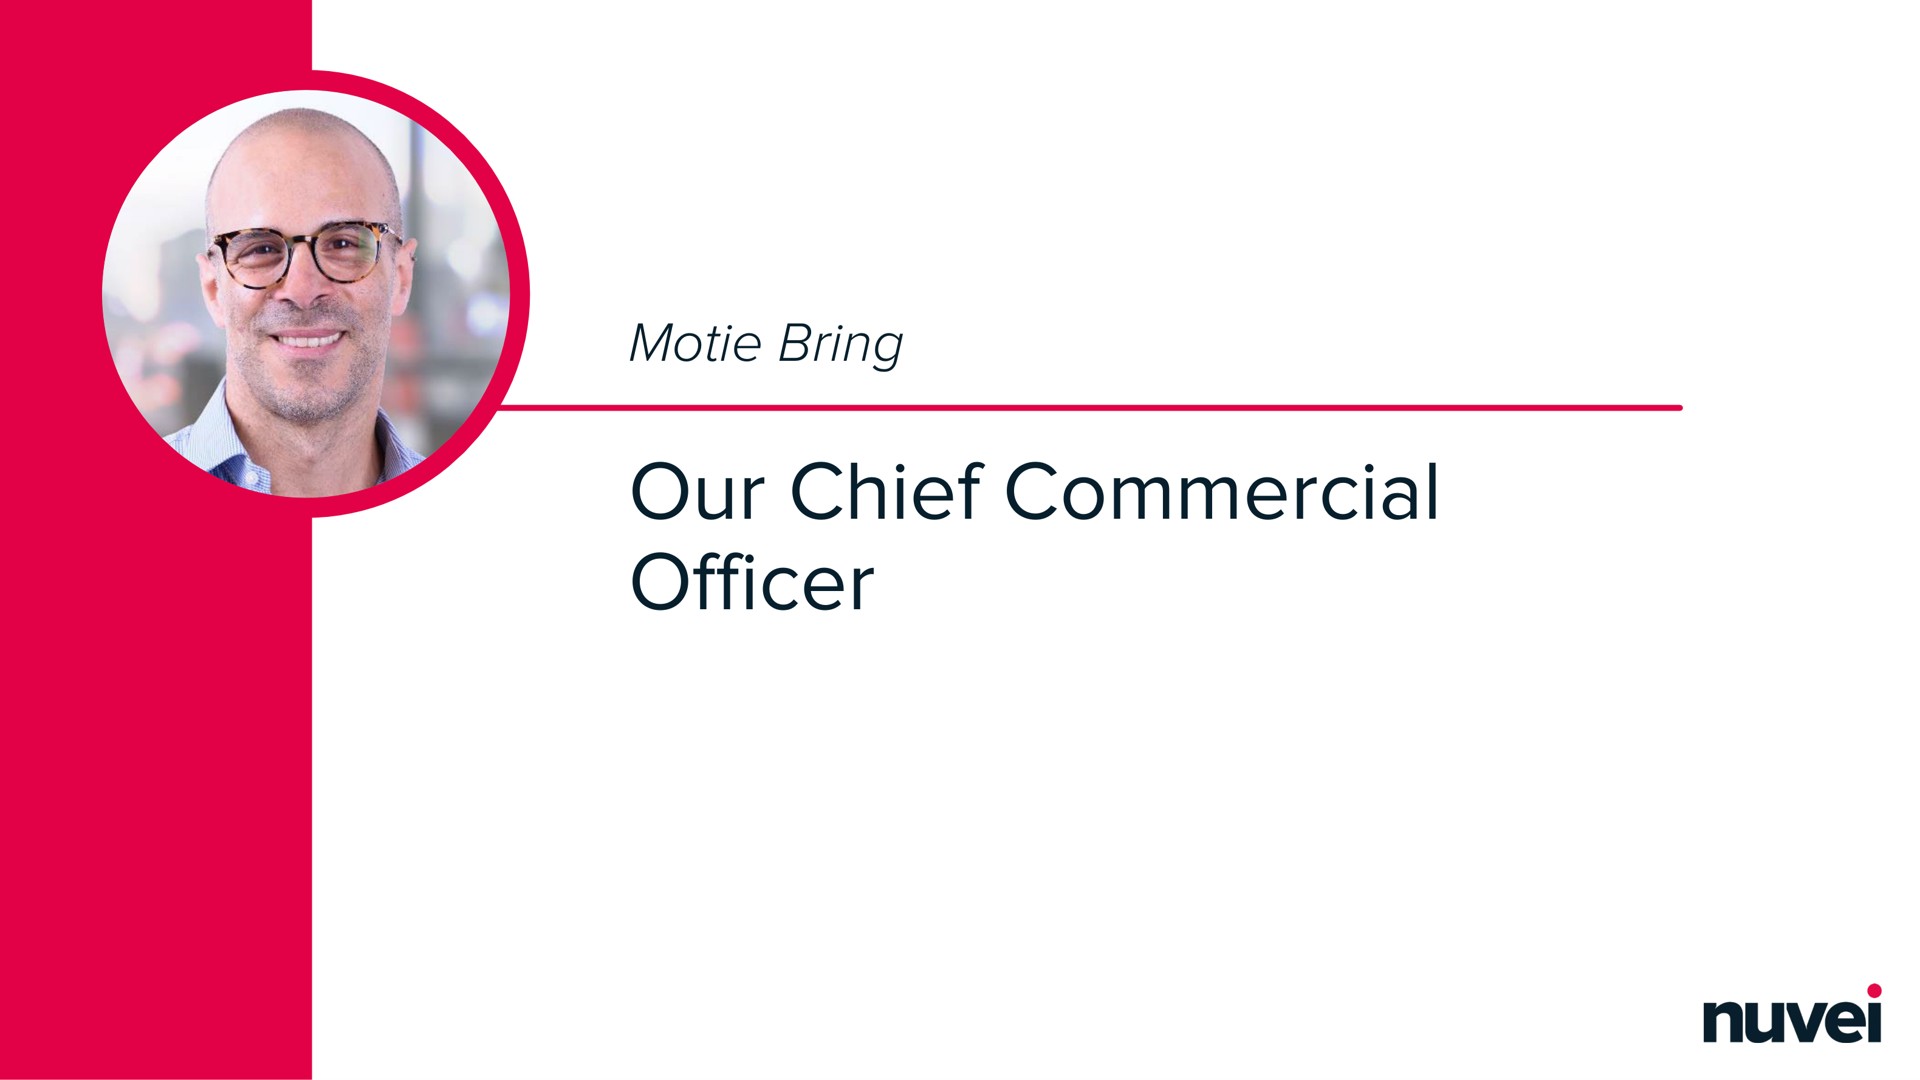 bring our chief commercial officer | Nuvei